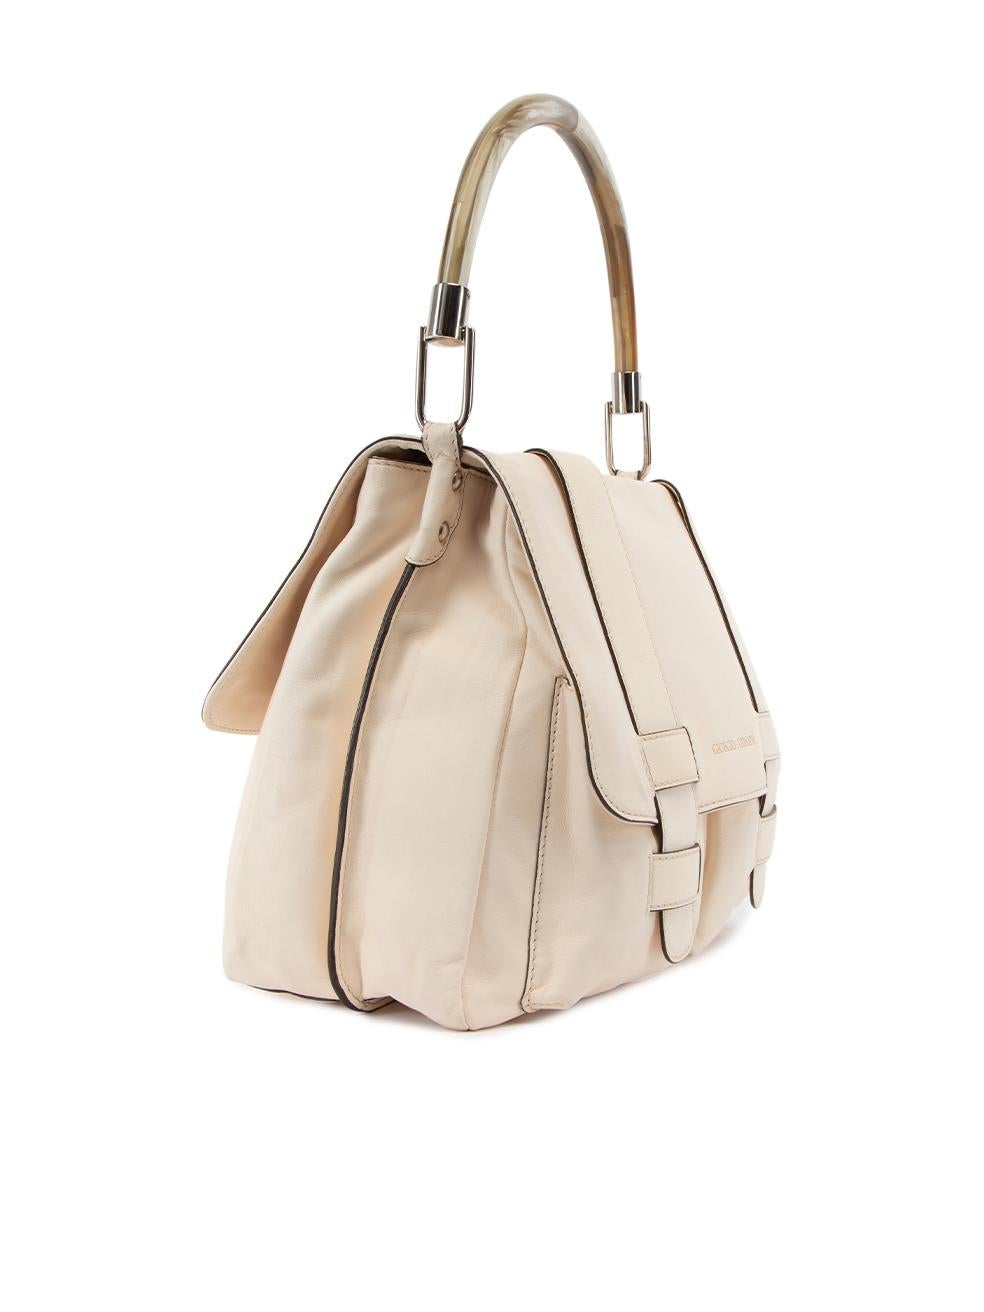 CONDITION is Very good. Minimal wear to bag is evident. Marks and stain on back and bottom of the bag is seen on this used Giorgio Armani designer resale item. Details Cream Leather 1x Resin top handle 1x Detachable shoulder strap Two main